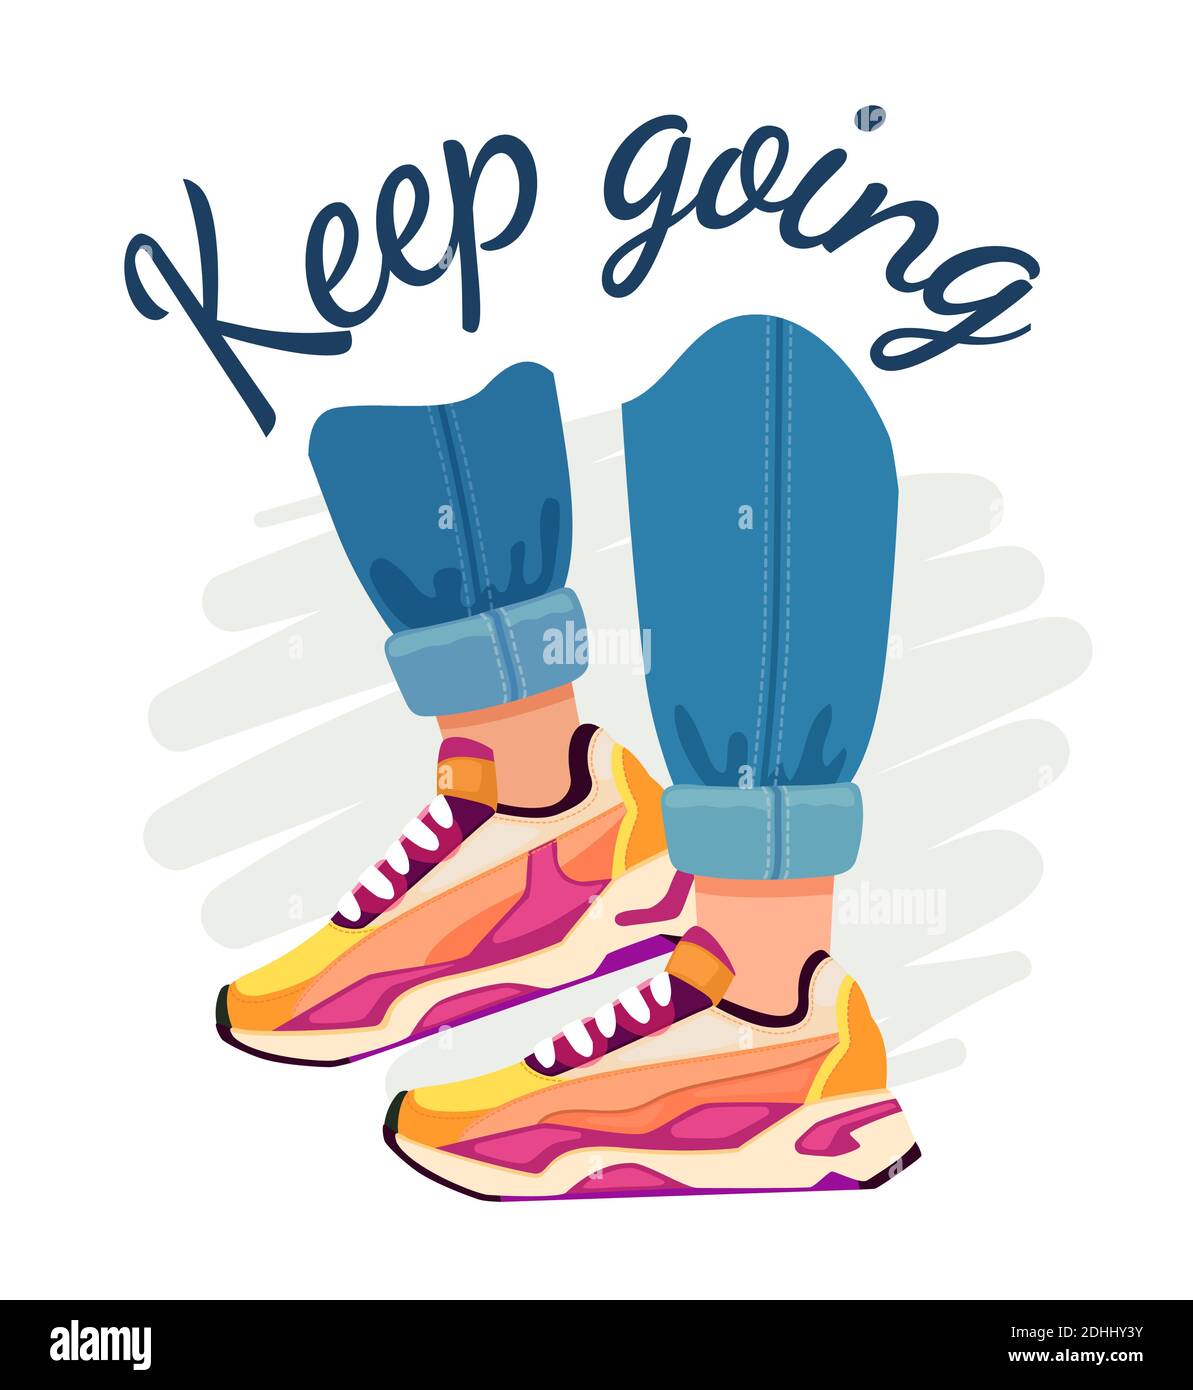 Slogan and sneakers. Street fashion poster with walking feet in jeans and sport shoes, motivational quote. Keep going vector t-shirt print Stock Vector